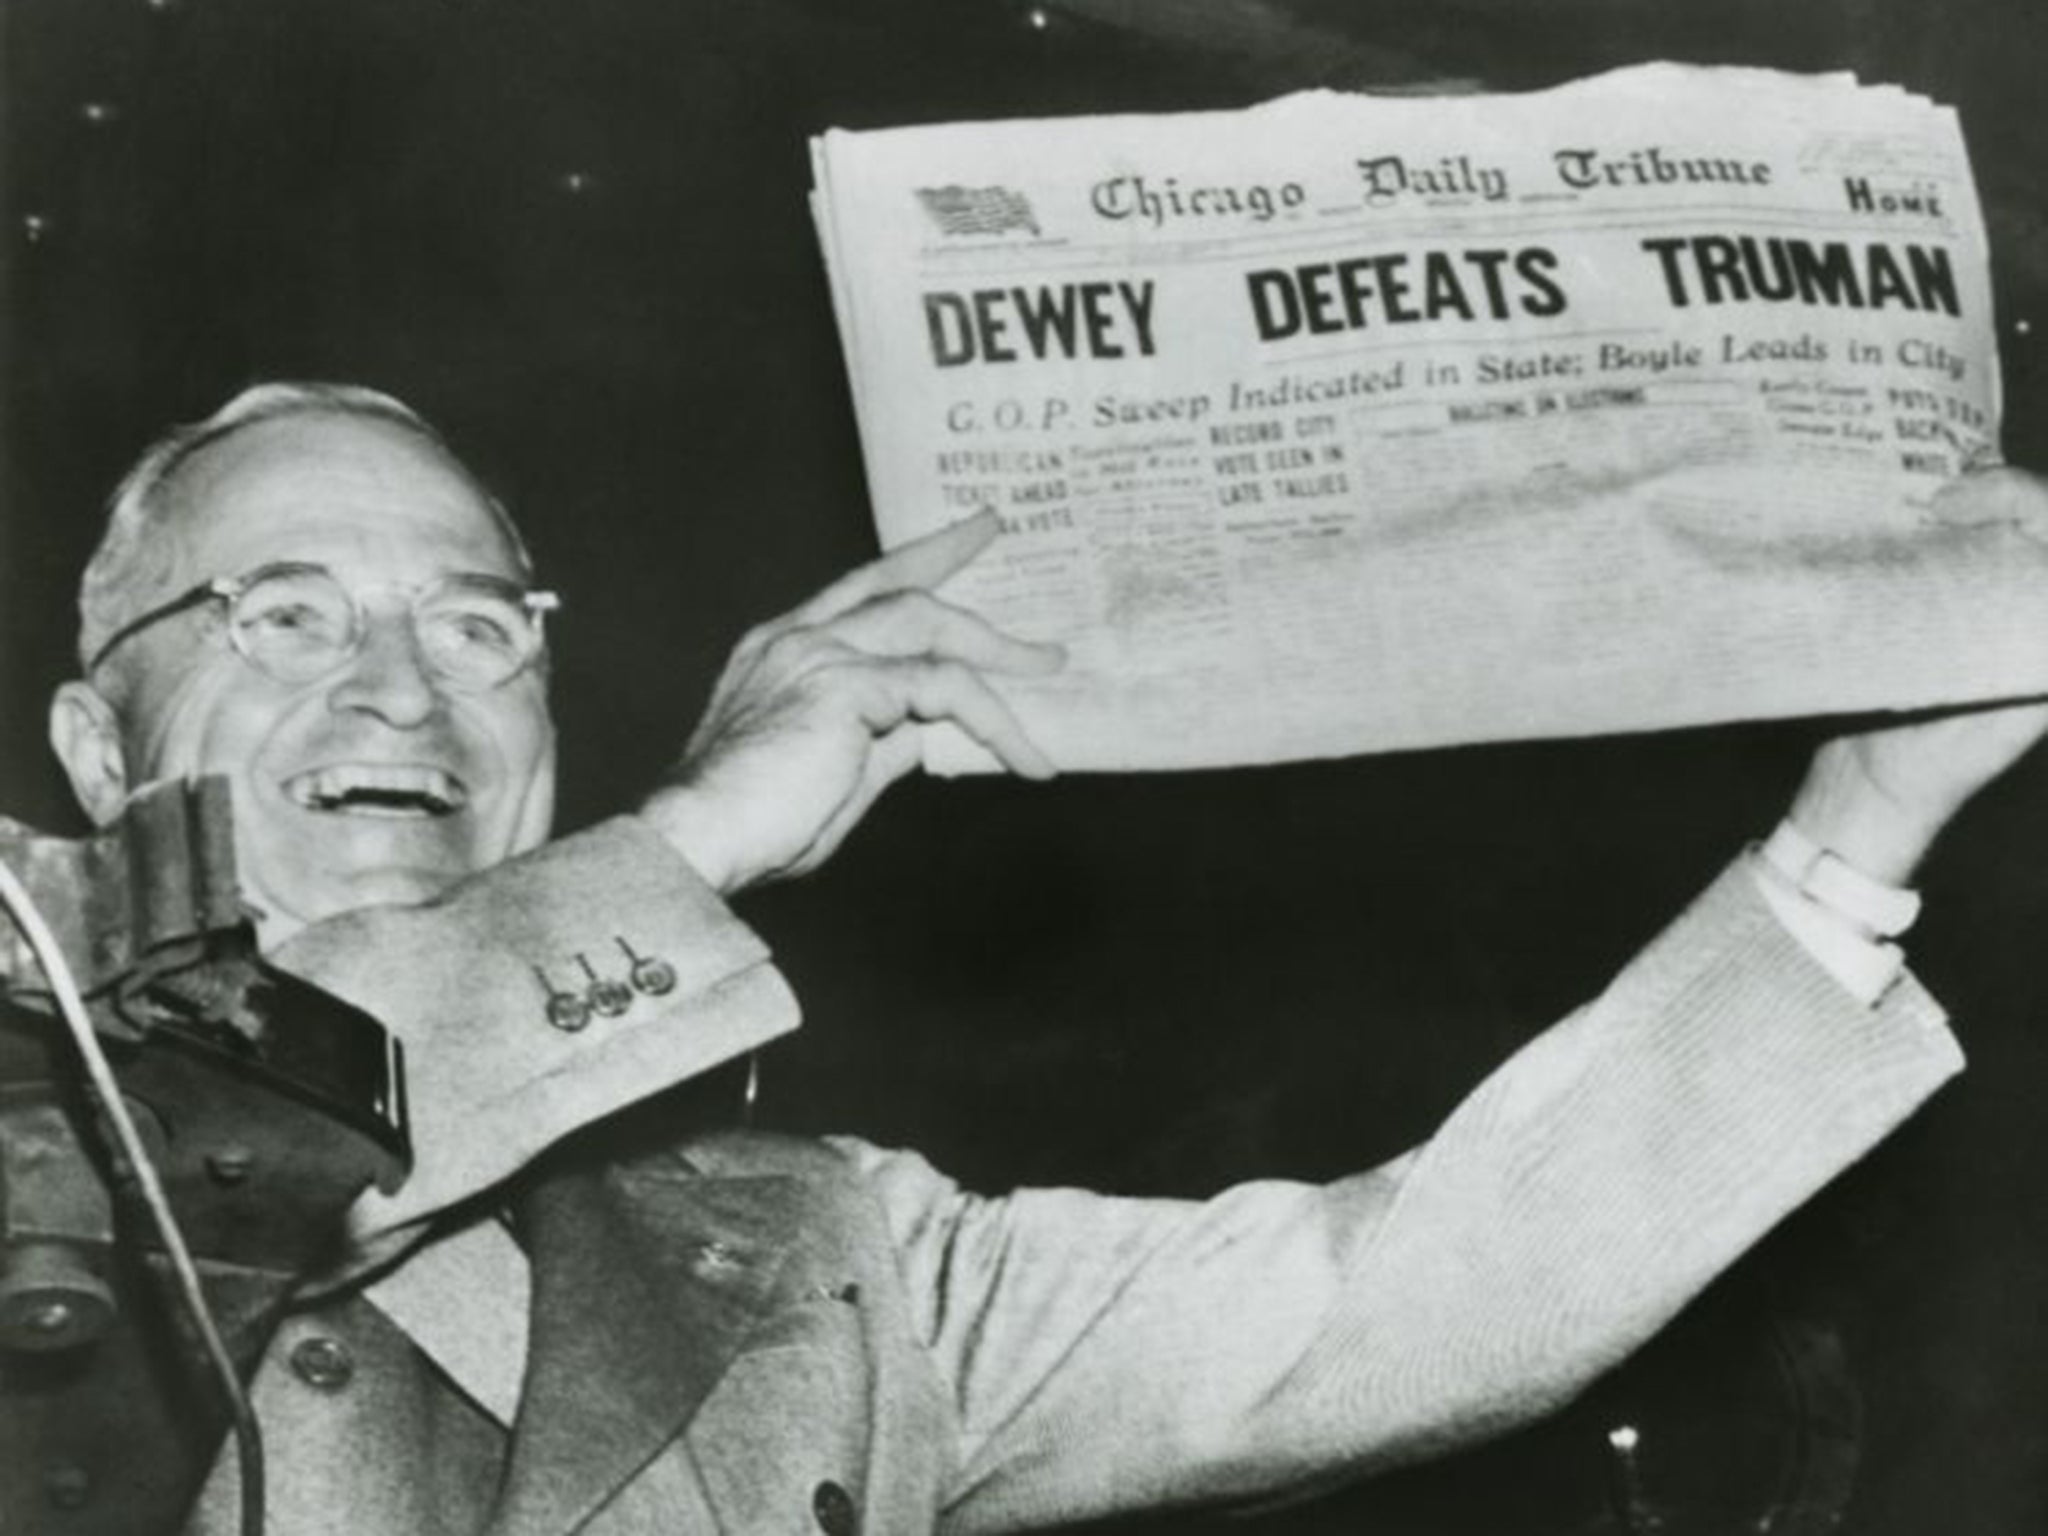 Harry S. Truman, president-elect, holds up edition of Chicago Daily Tribune with headline ‘Dewey Defeats Truman’ in 1948